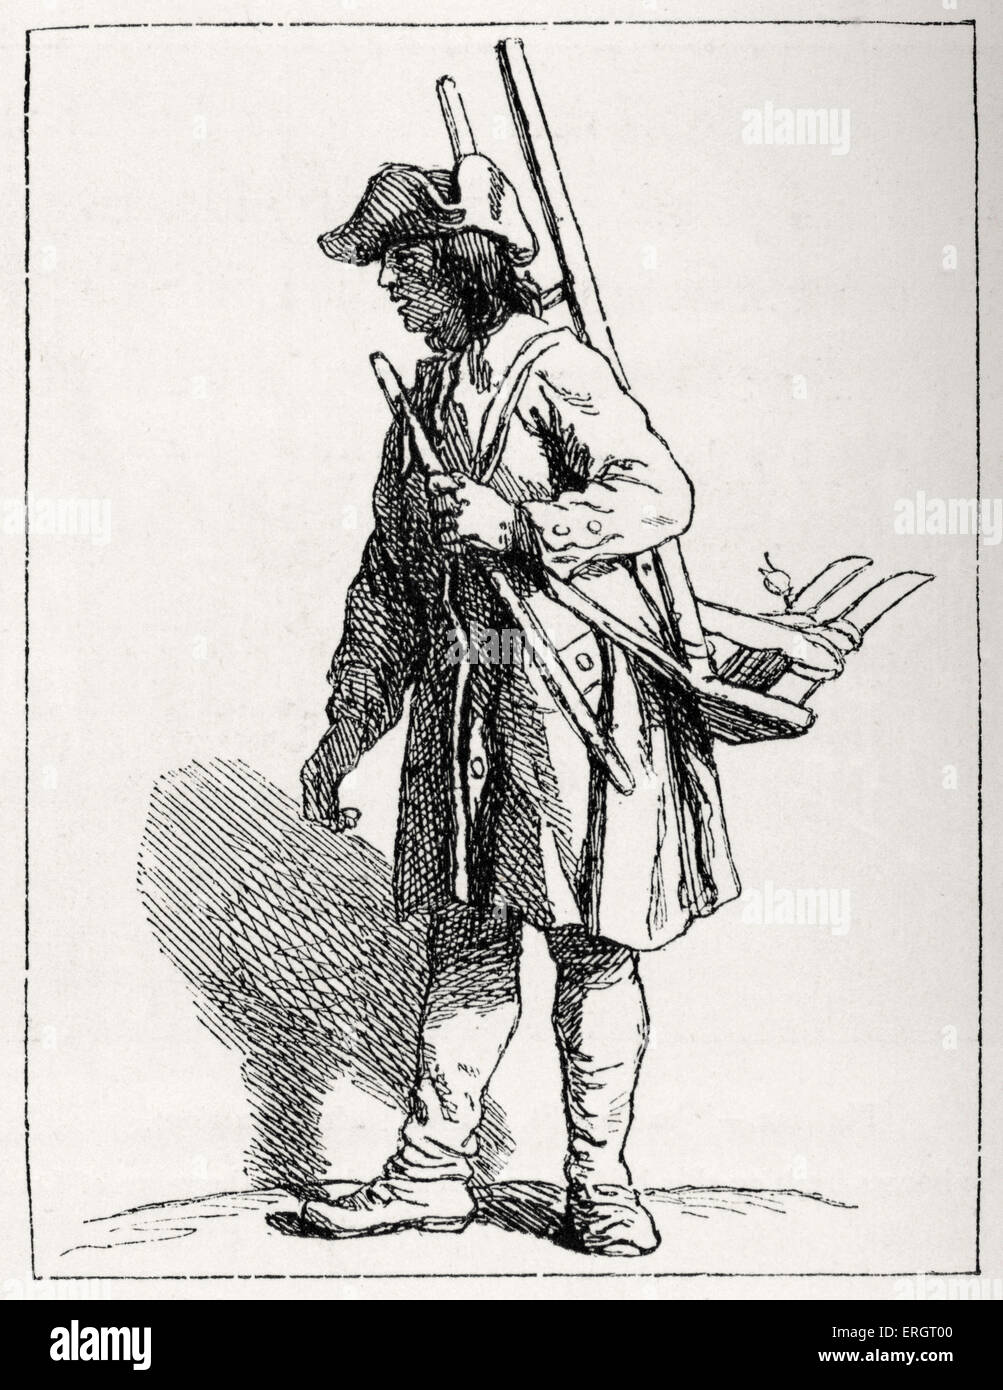 Daily life in French history: a street porter in 18th century Paris,  France. Working class, poor, rustic, pauper, beggar, during reign of Louis  XV Stock Photo - Alamy